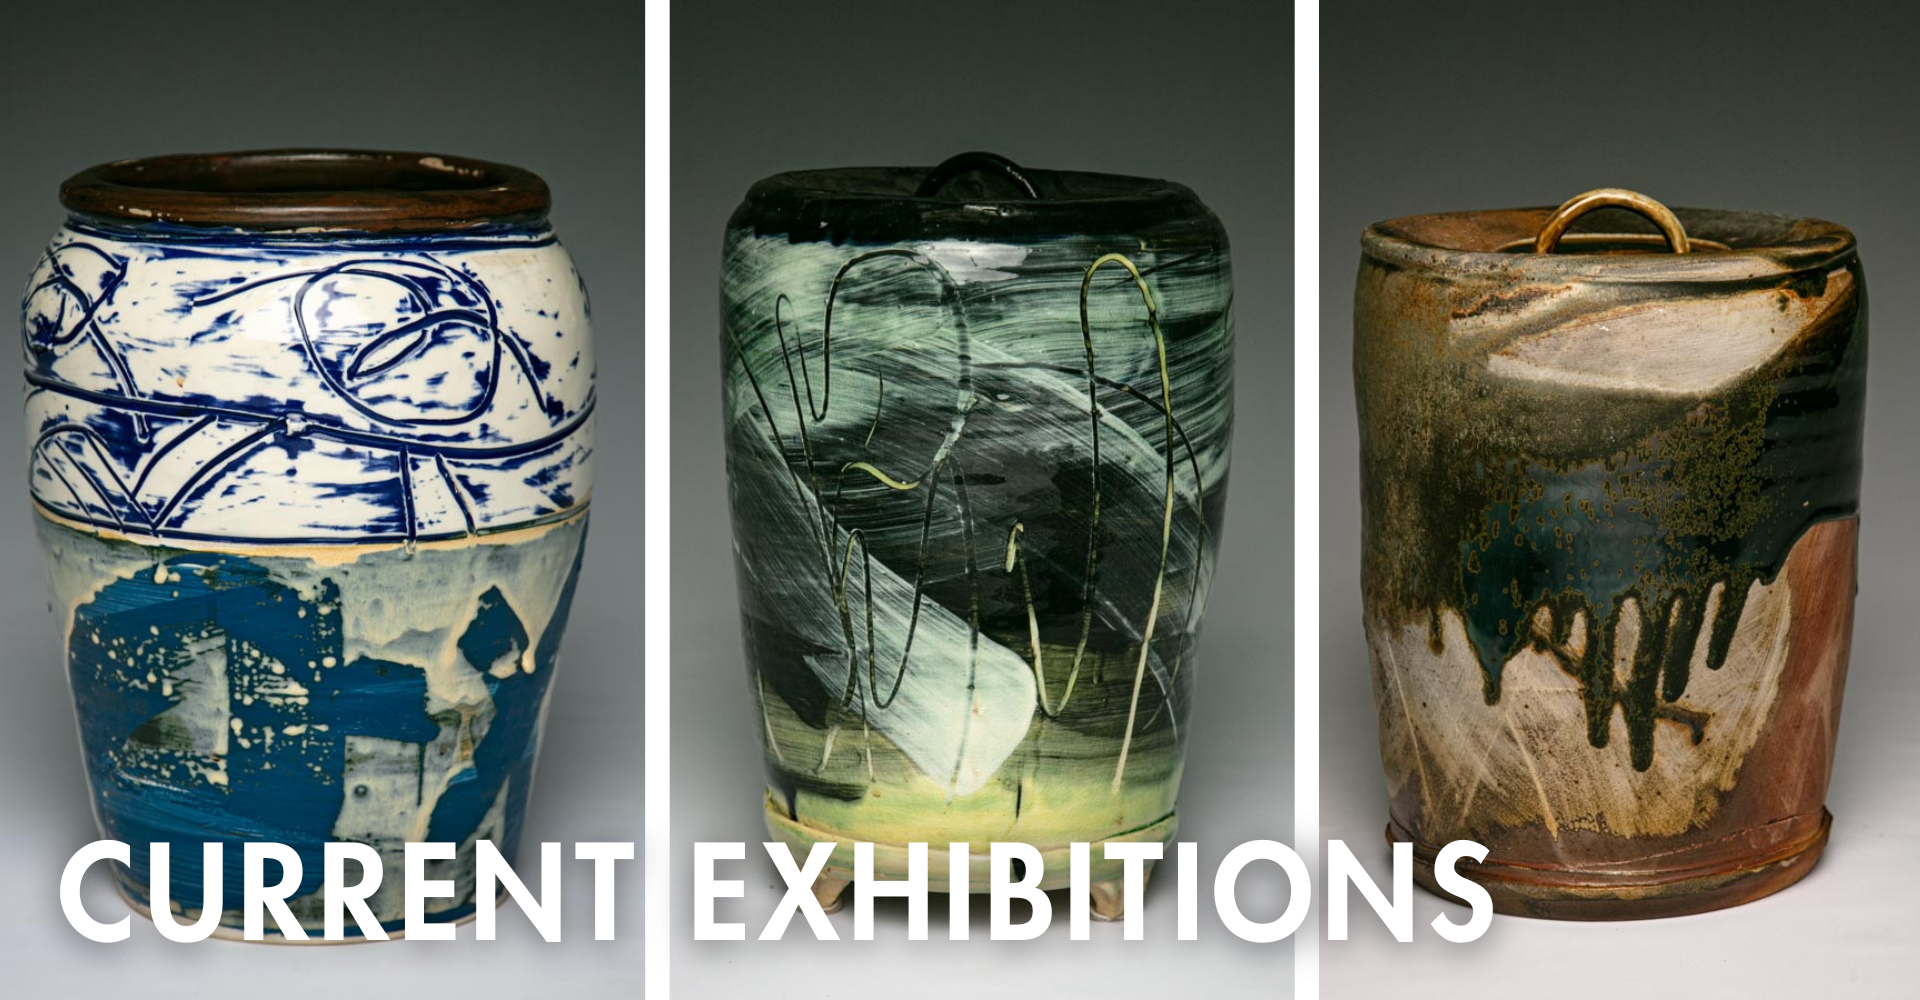 three ceramic pots with the words "Current Exhibitions"